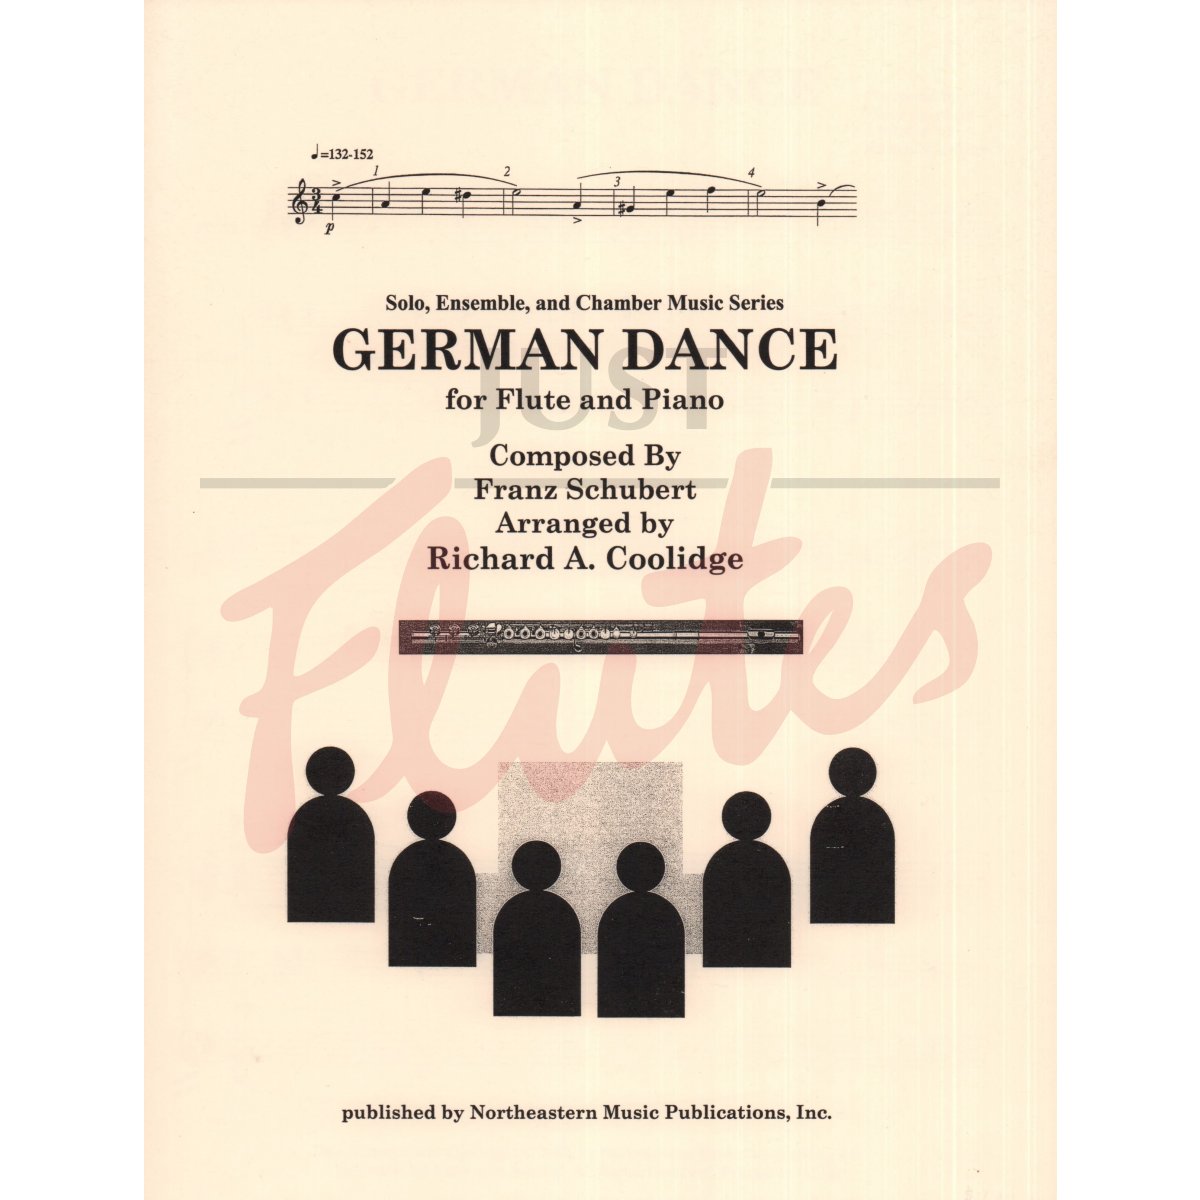 German Dance for Flute and Piano